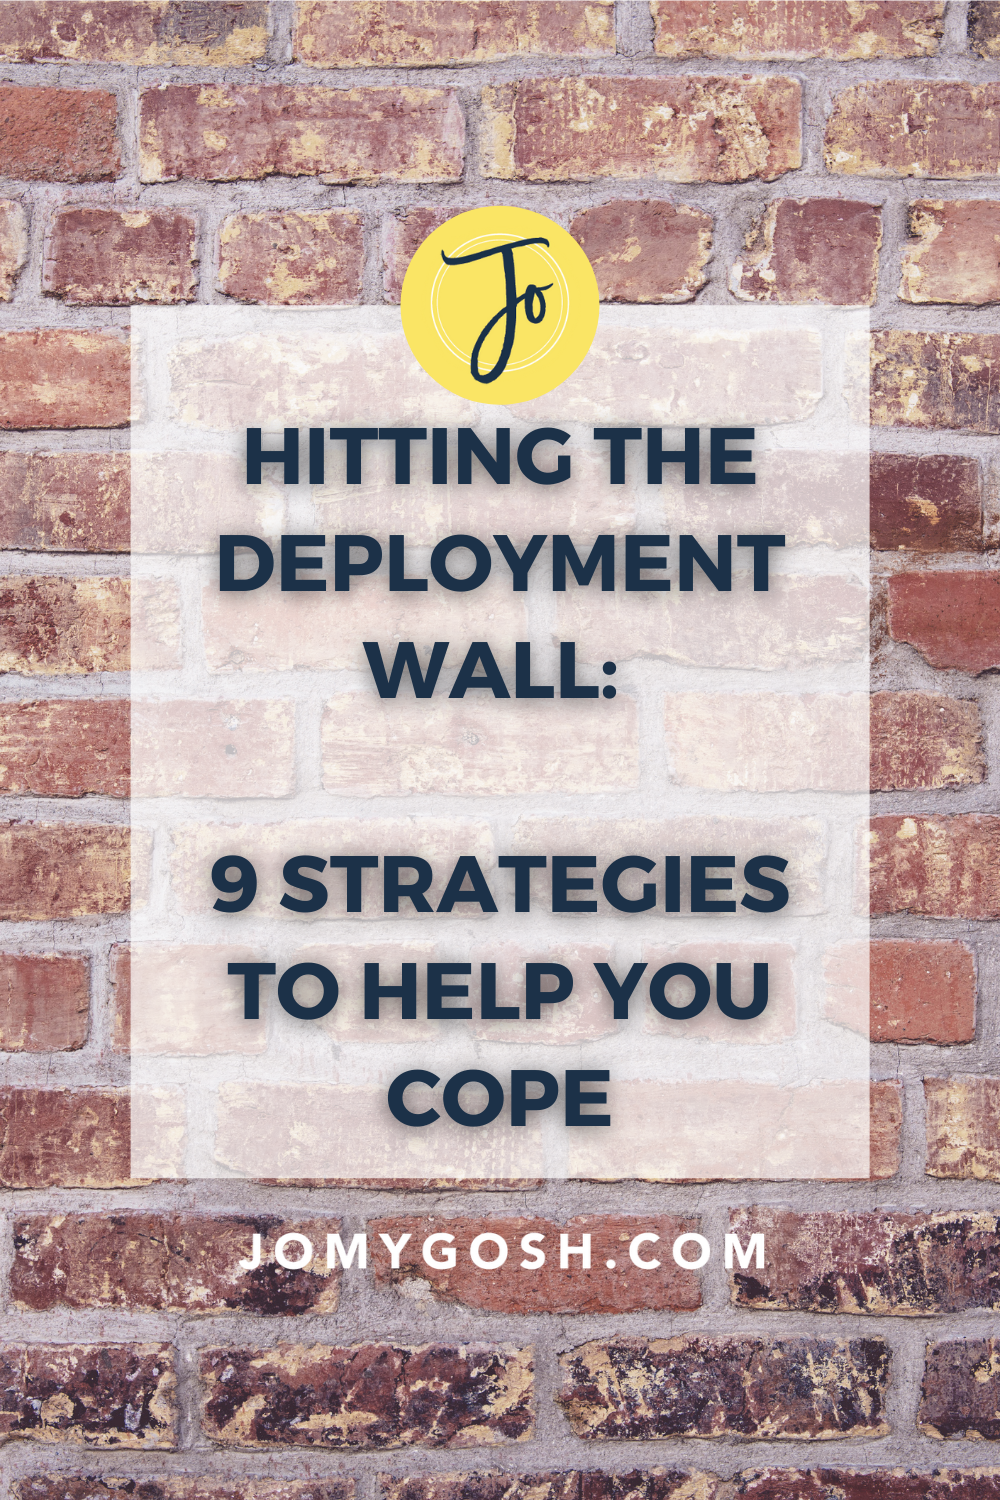 When you feel like you can't go on, you can. How to beat the deployment wall.